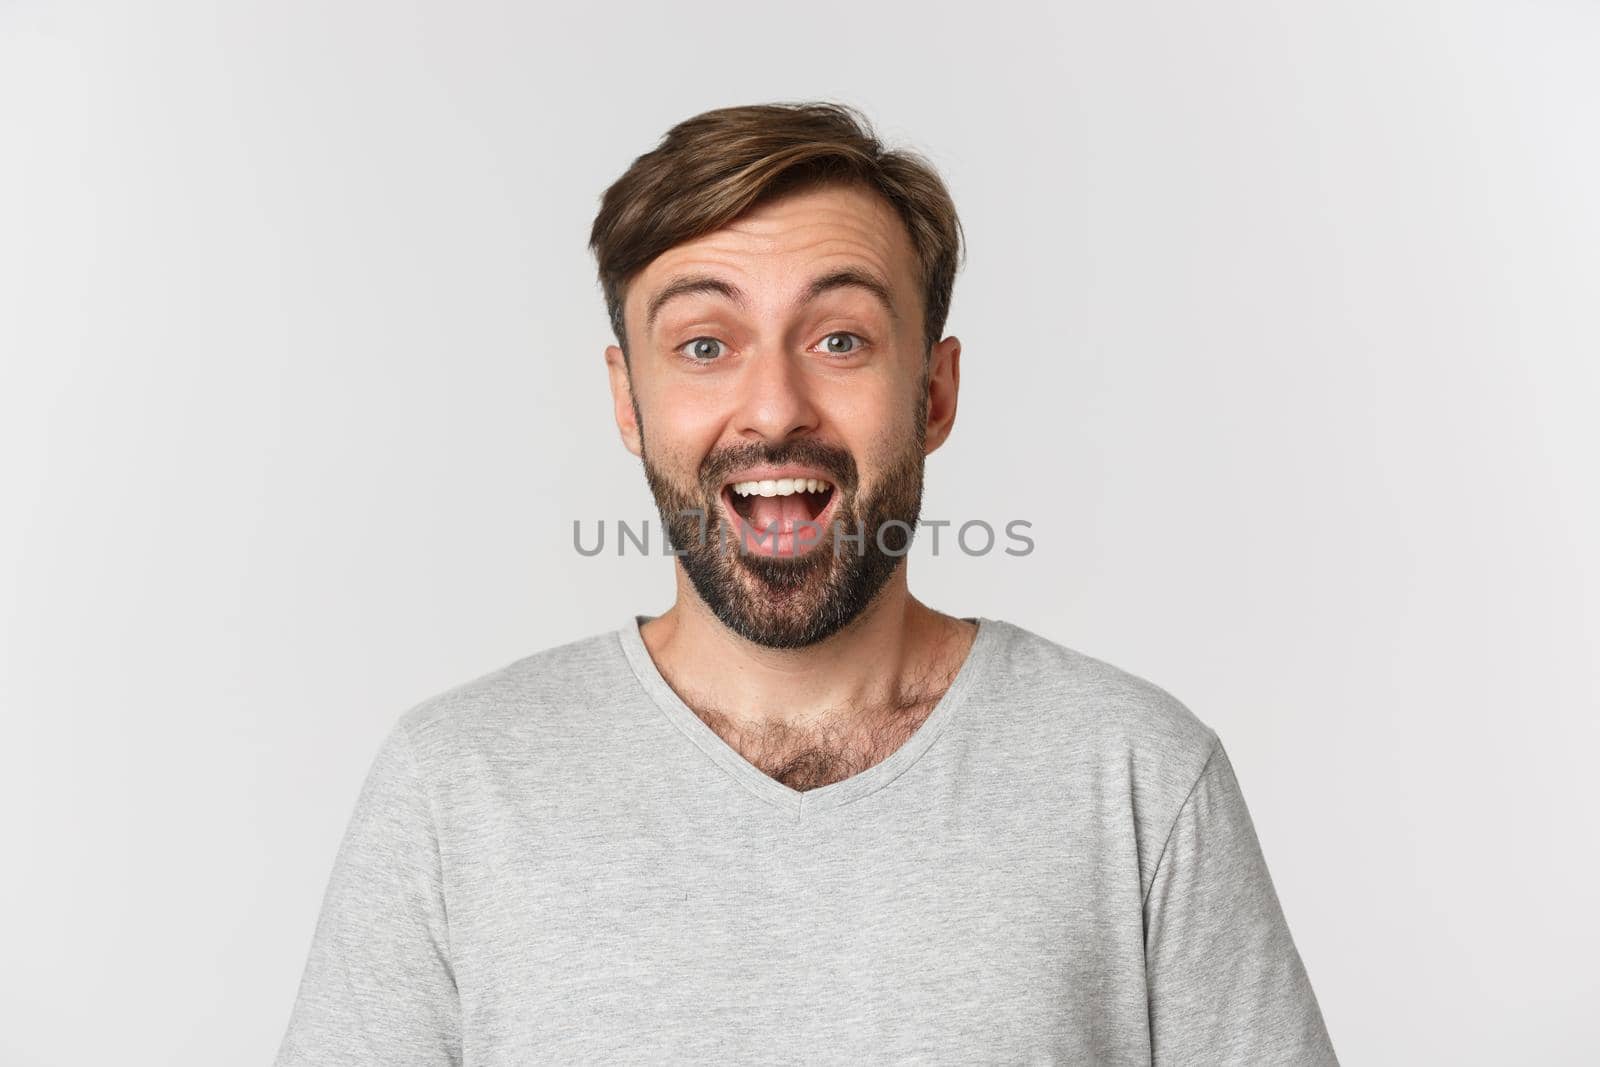 Close-up of handsome adult man with beard, wearing gray t-shirt, smiling surprised, standing over white background.